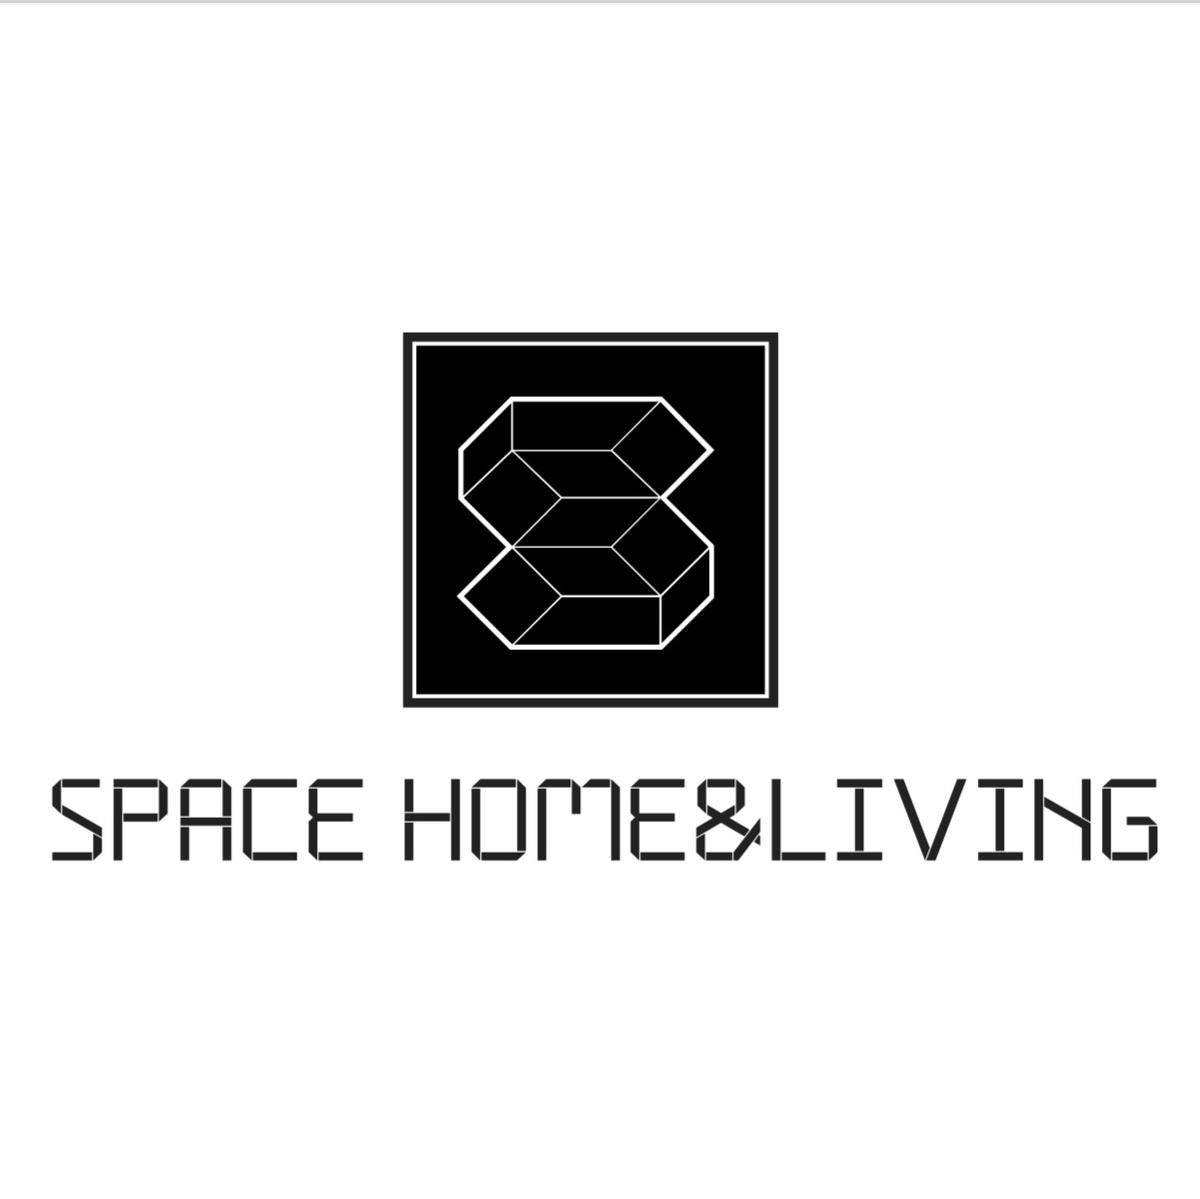 SpaceHomeLving's images